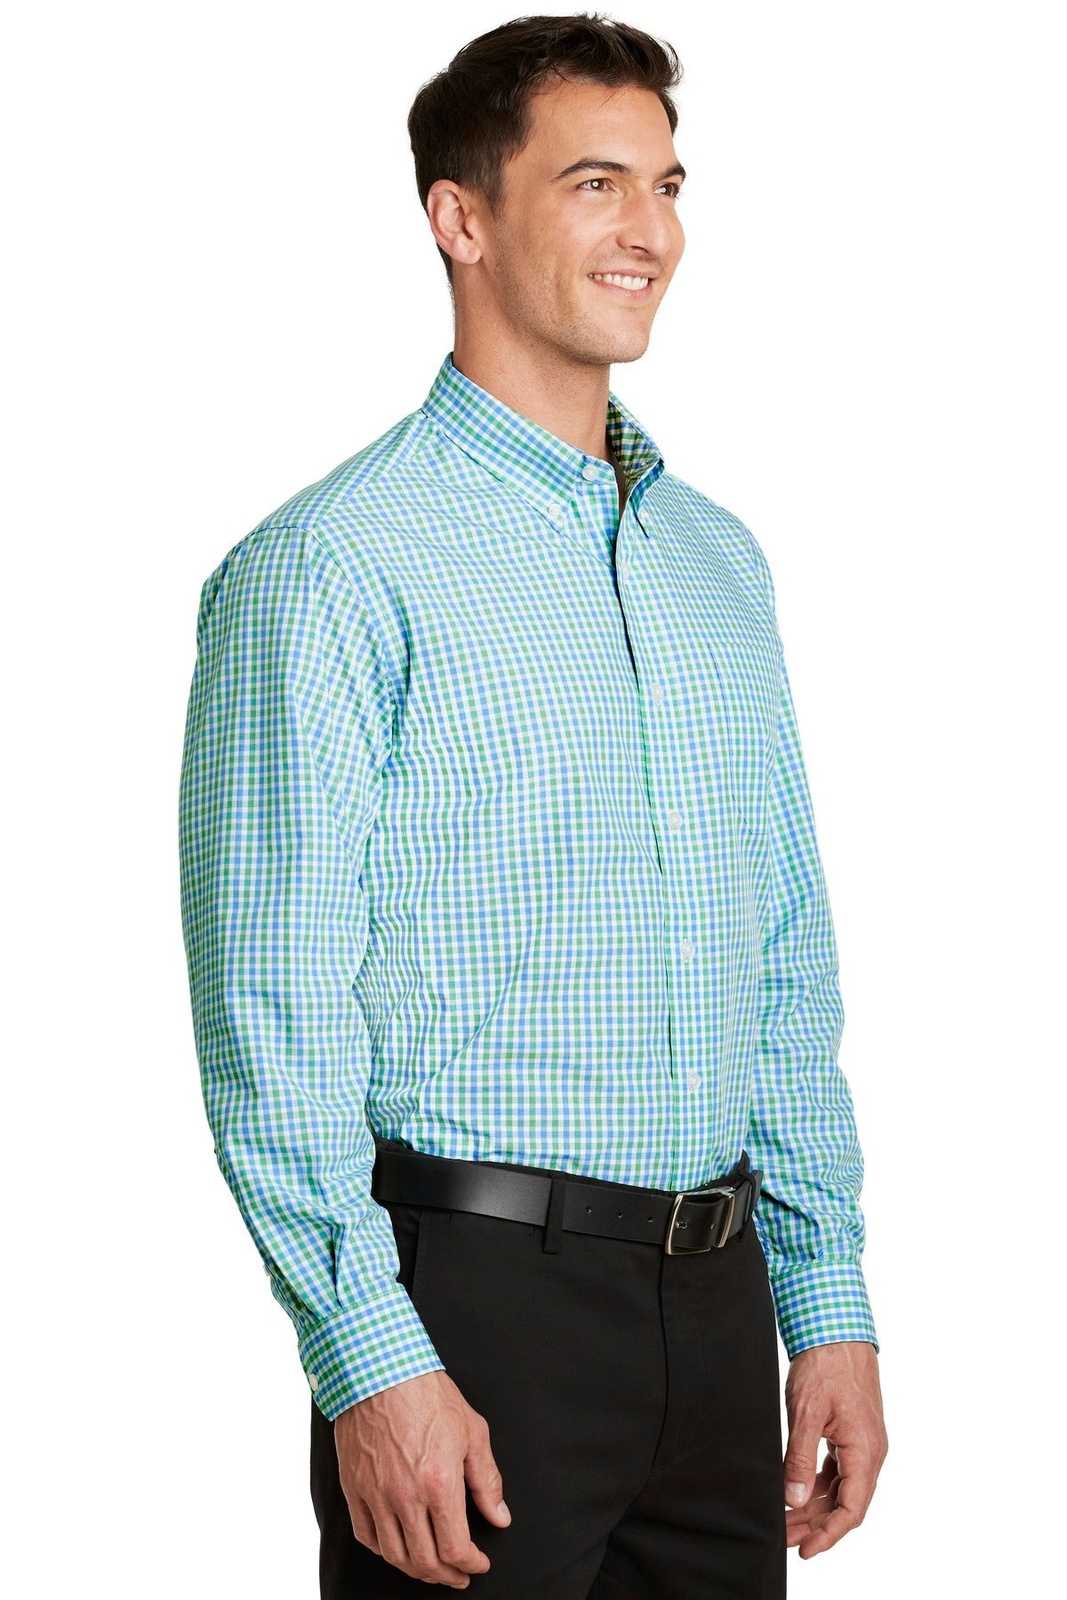 Port Authority S654 Long Sleeve Gingham Easy Care Shirt - Green Aqua - HIT a Double - 4